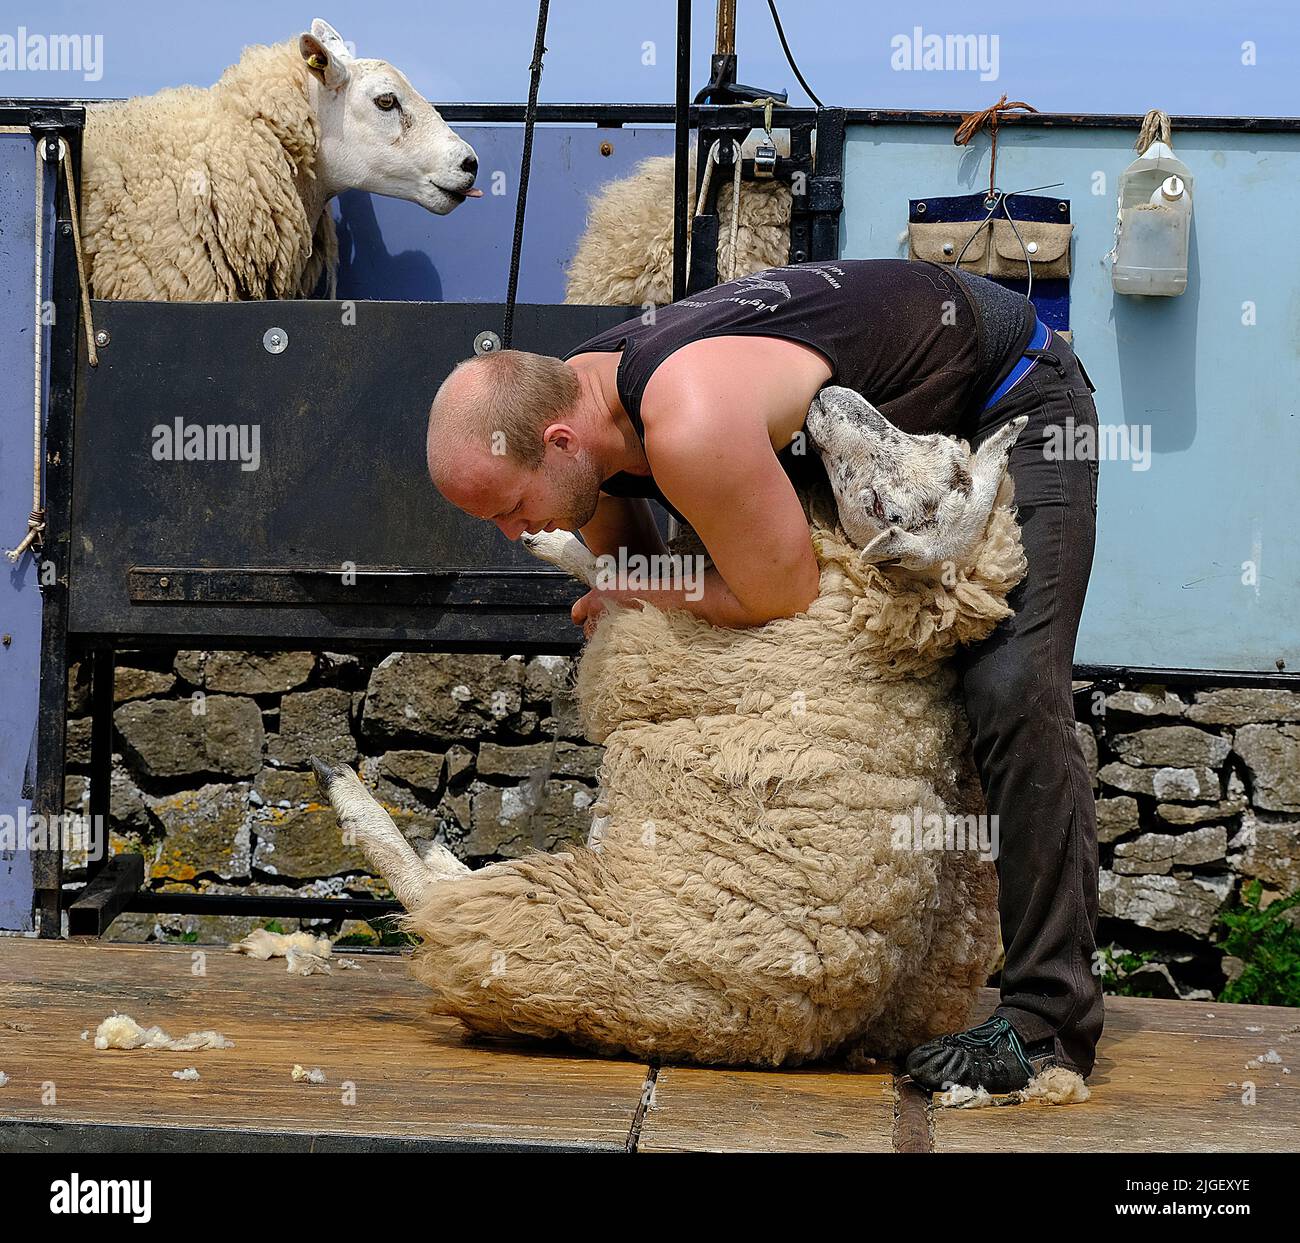 Sheep shearing by contractors on northern UK arm. Stock Photo